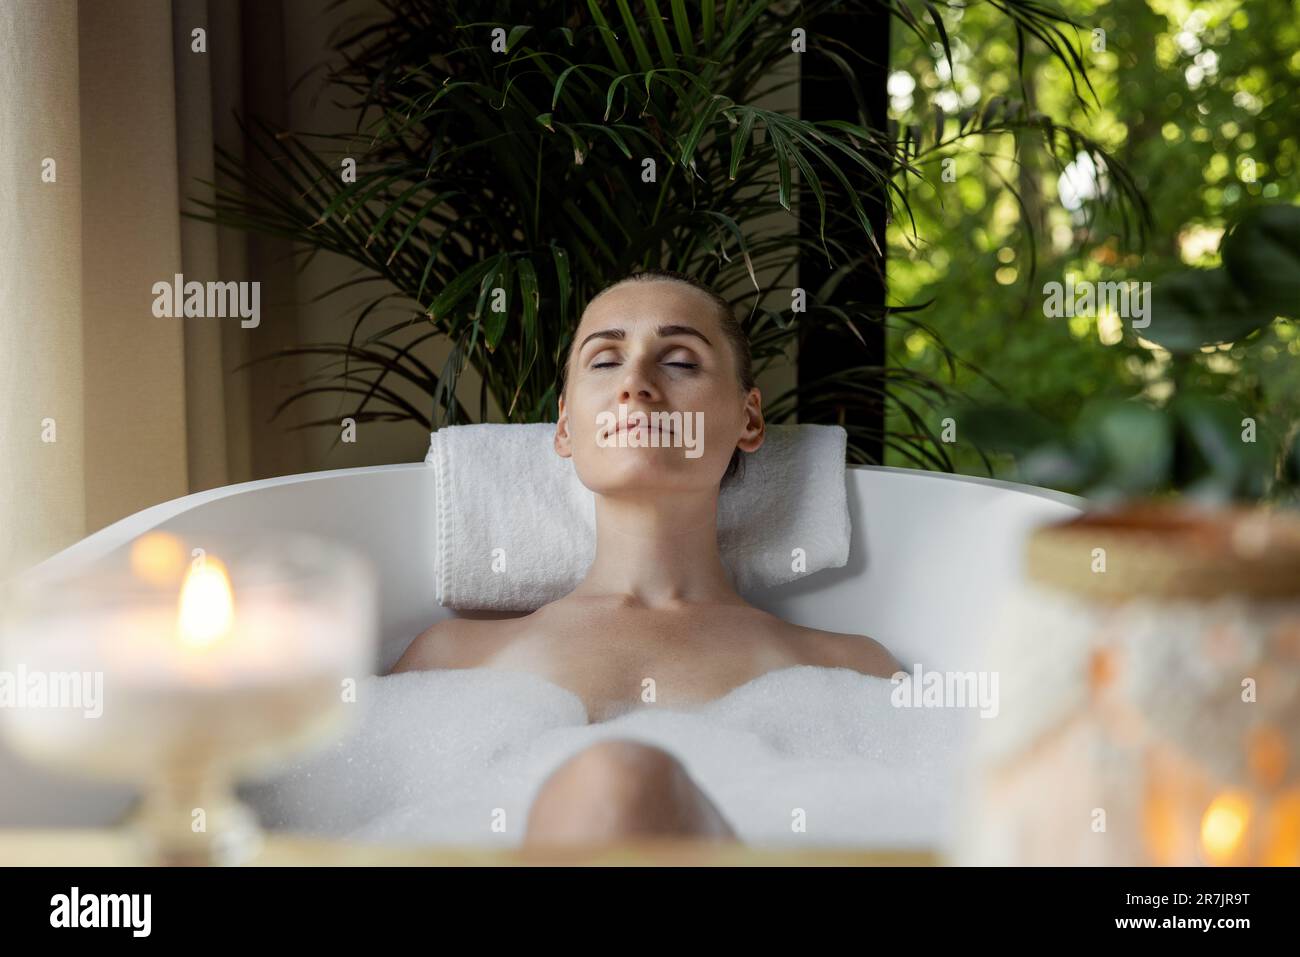 https://c8.alamy.com/comp/2R7JR9T/woman-enjoying-spa-bath-with-foam-and-scented-candles-body-care-aromatherapy-and-mental-wellness-2R7JR9T.jpg